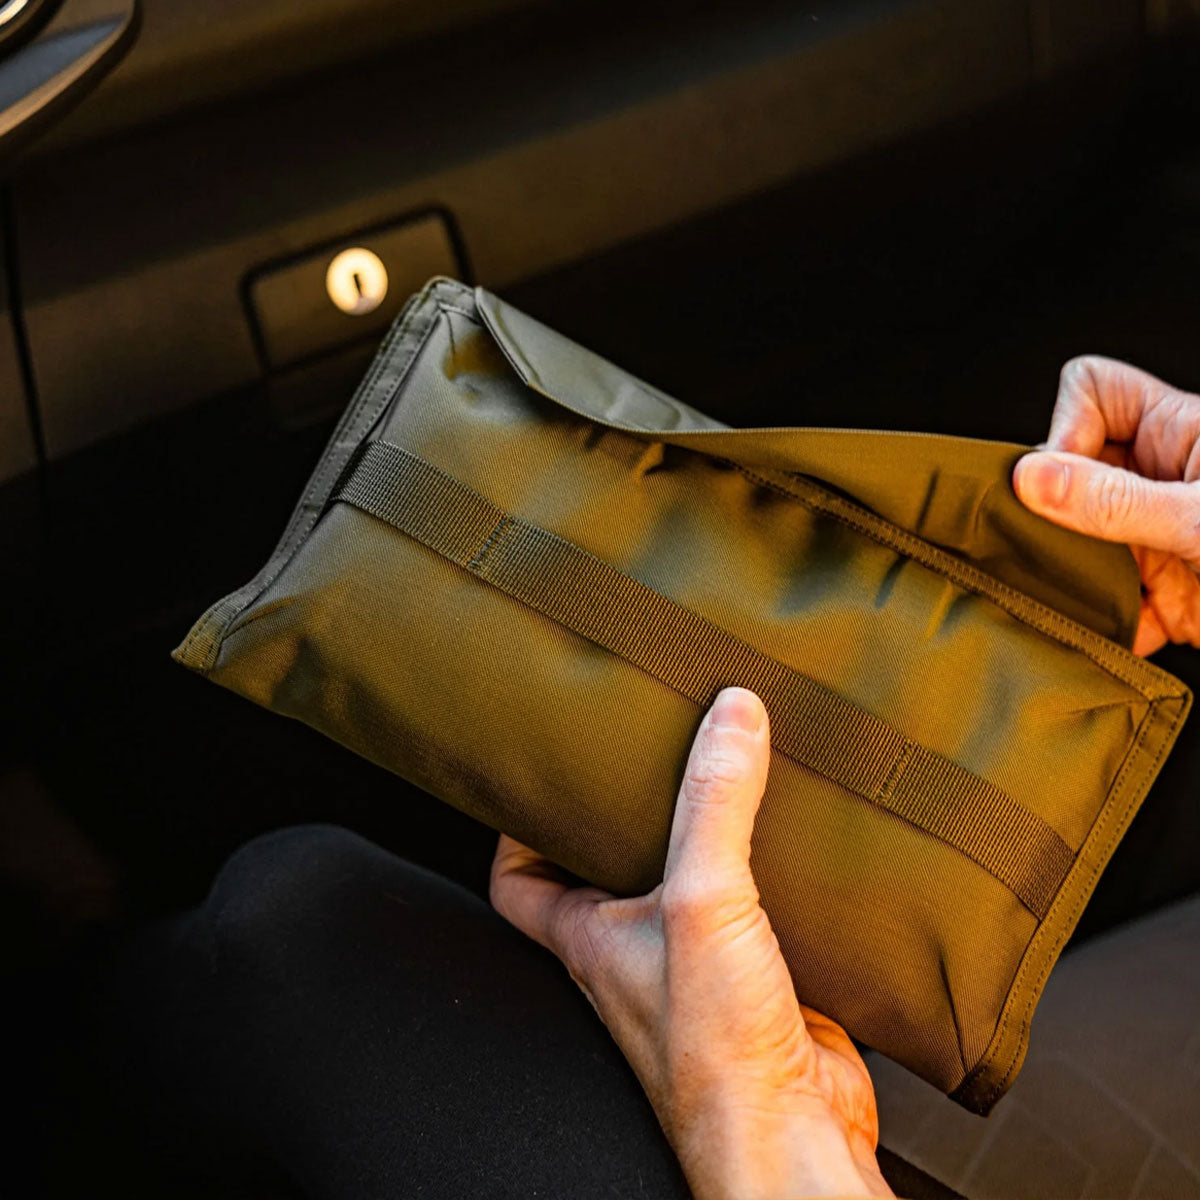 EVERGOODS : Civic Access Pouch 1L : OD Green